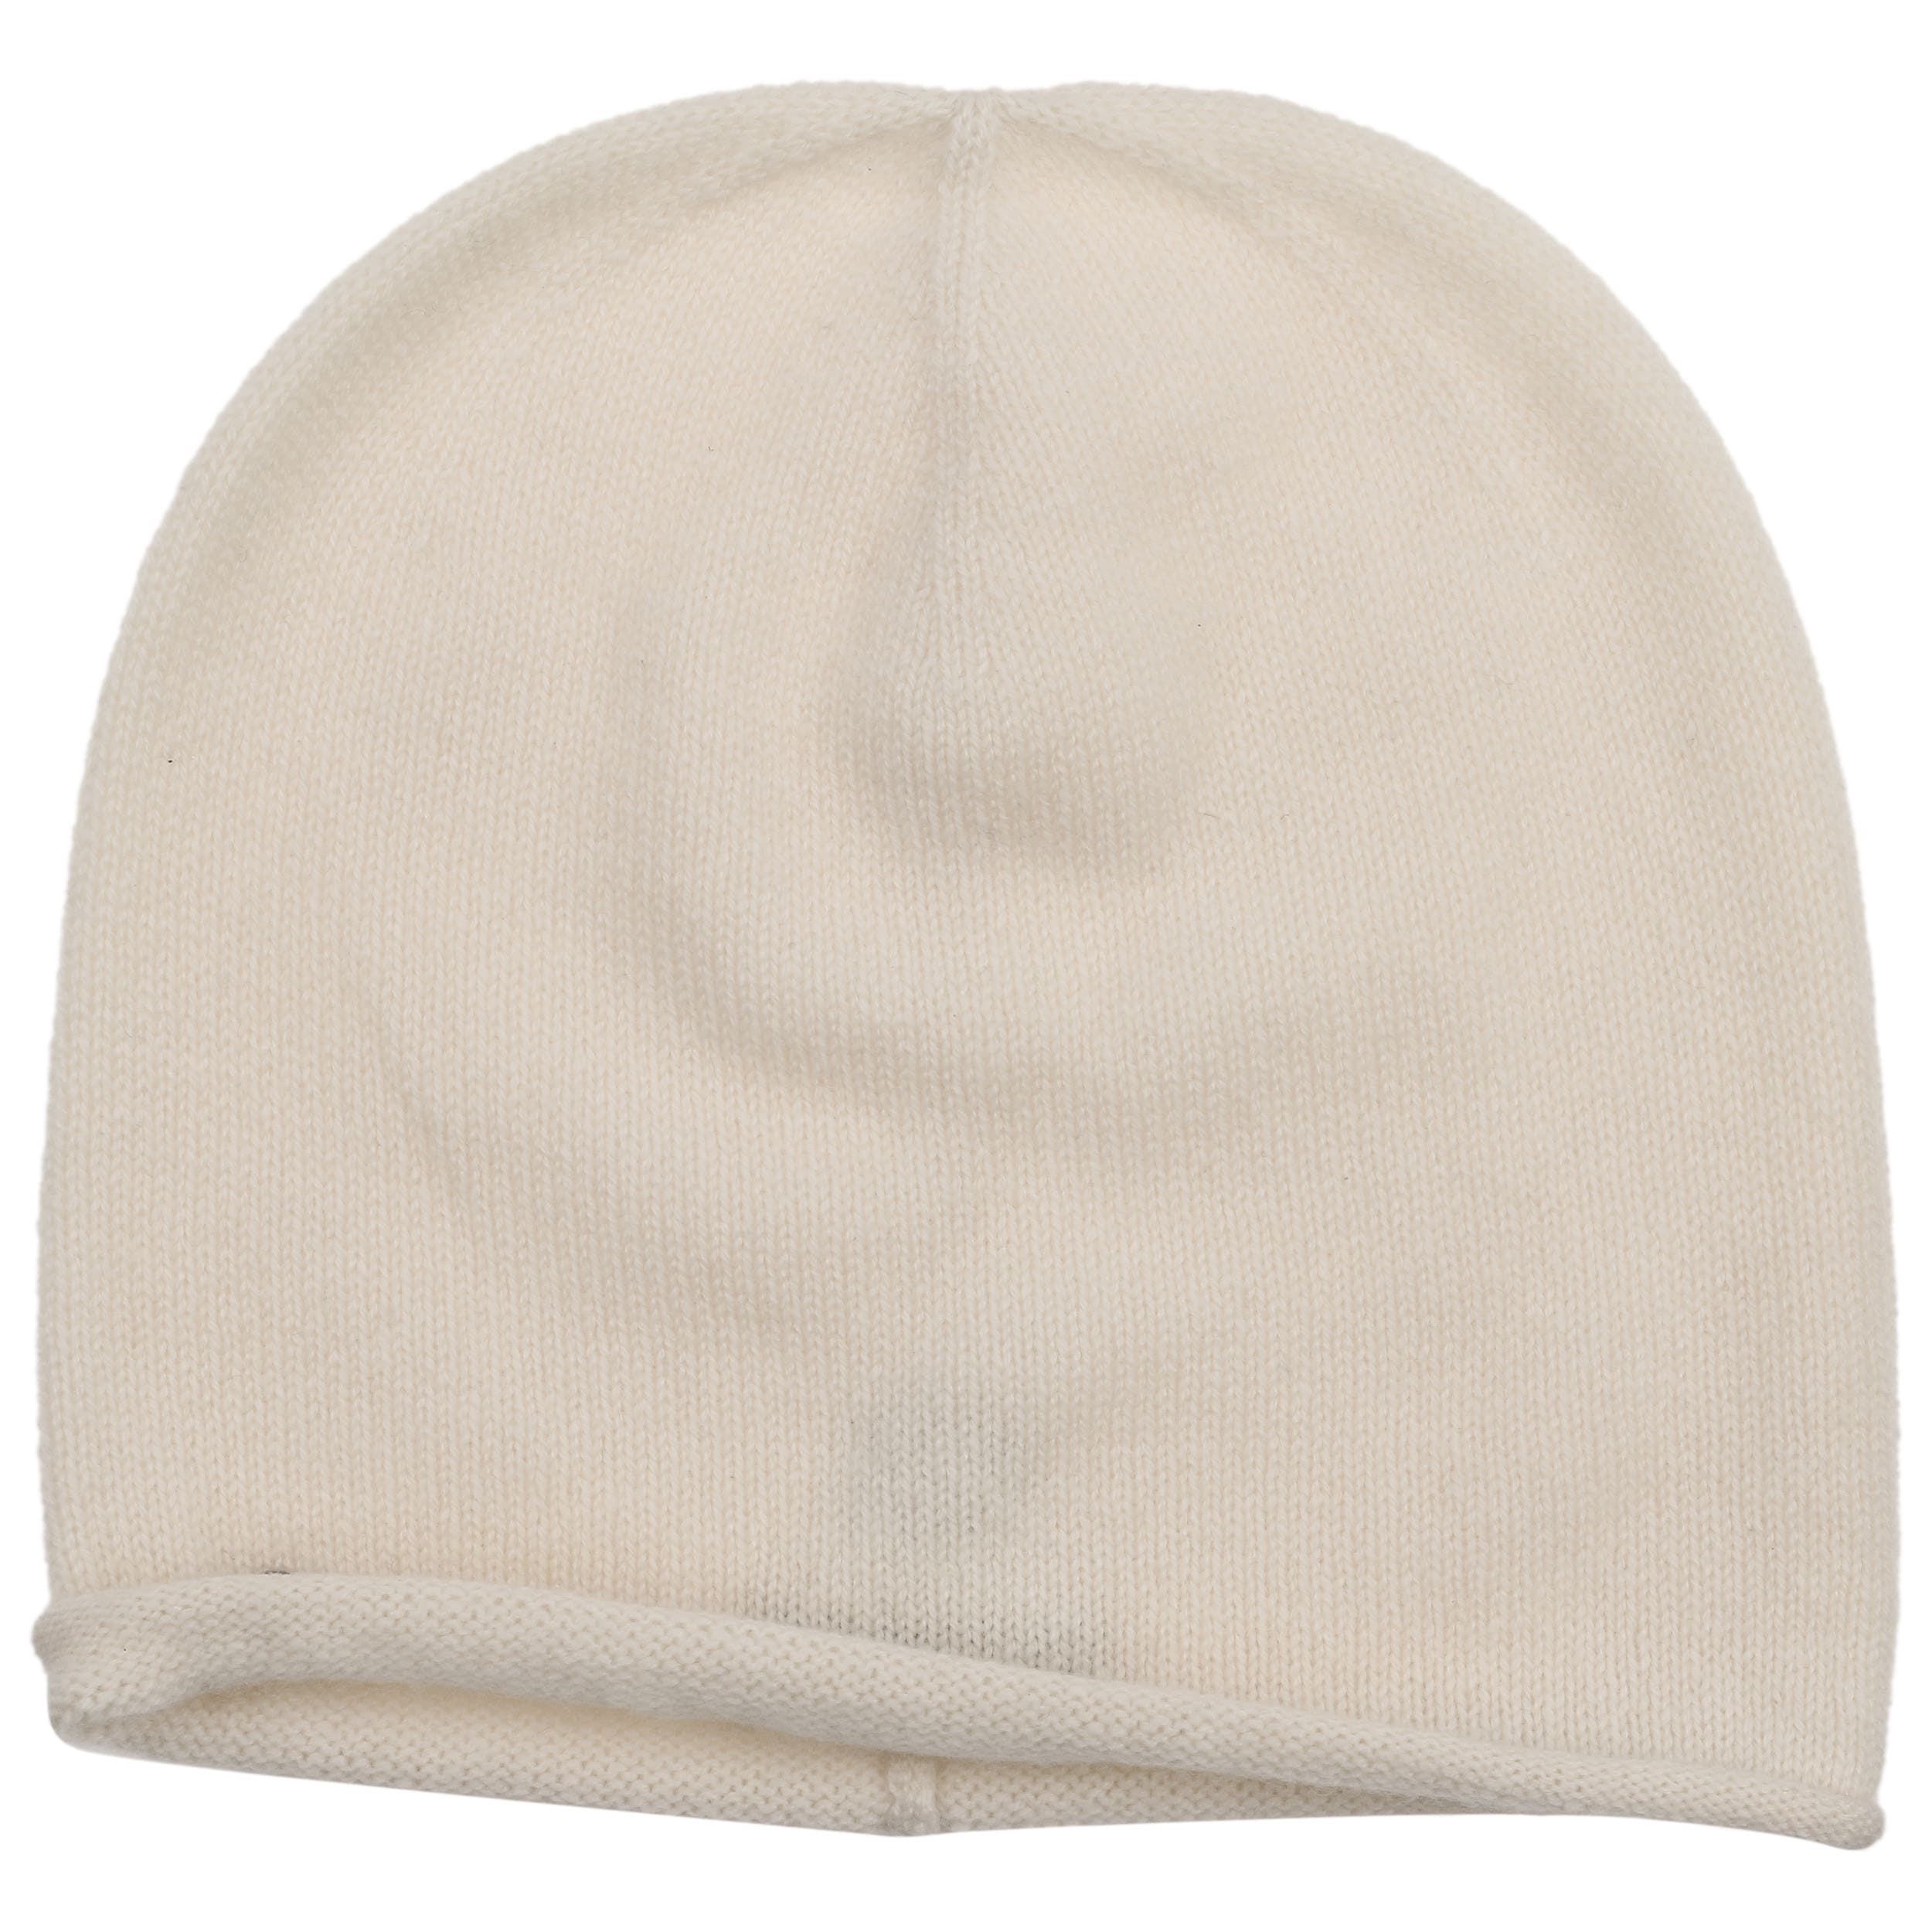 Rolled Edge Cashmere Beanie by Seeberger - 72,95